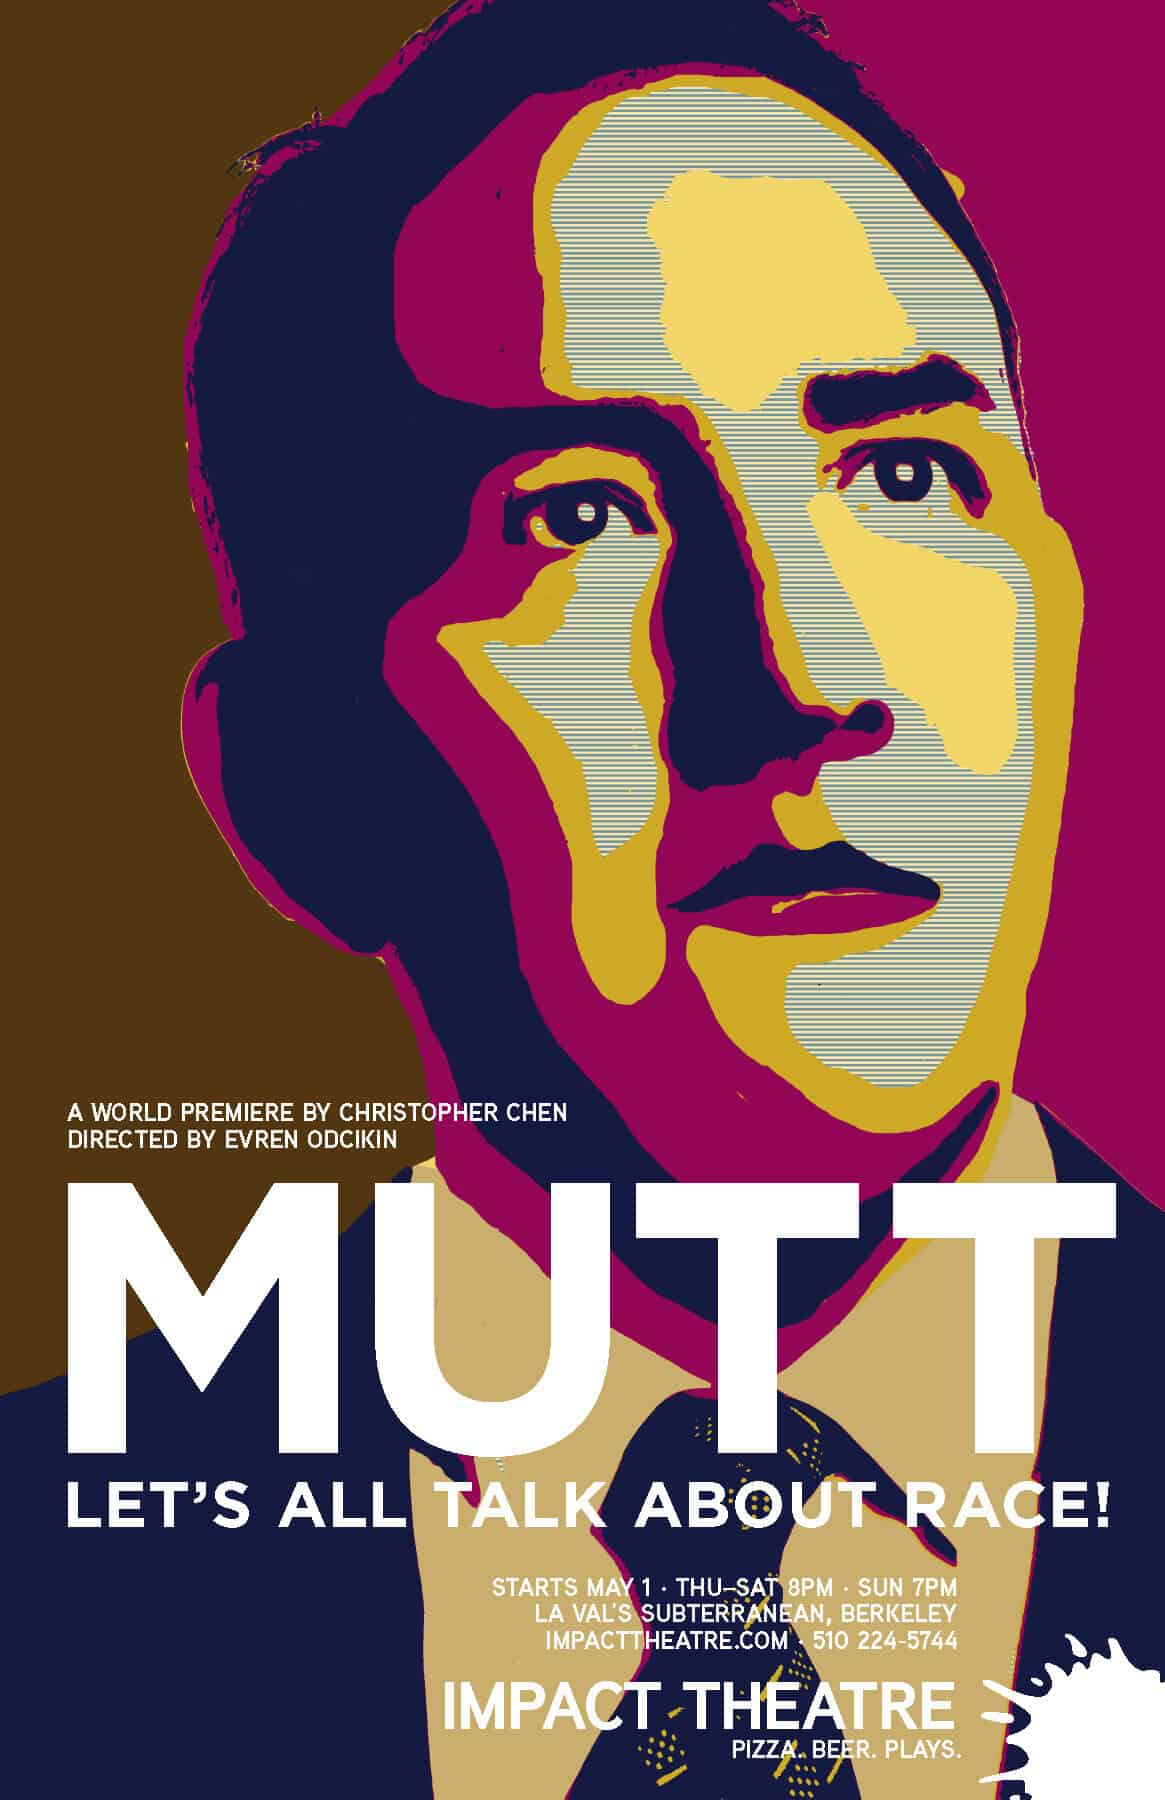 Poster for Christopher Chen's "Mutt: Let's All Talk About Race" at Impact Theatre. The image is of a multiethnic politician in the style of the Barack Obama "Hope" poster, in a stylized illustration that changes the colors of the inspiration image to brown, magenta, yellow, orange, and a blue with horizontal lines as if from television.